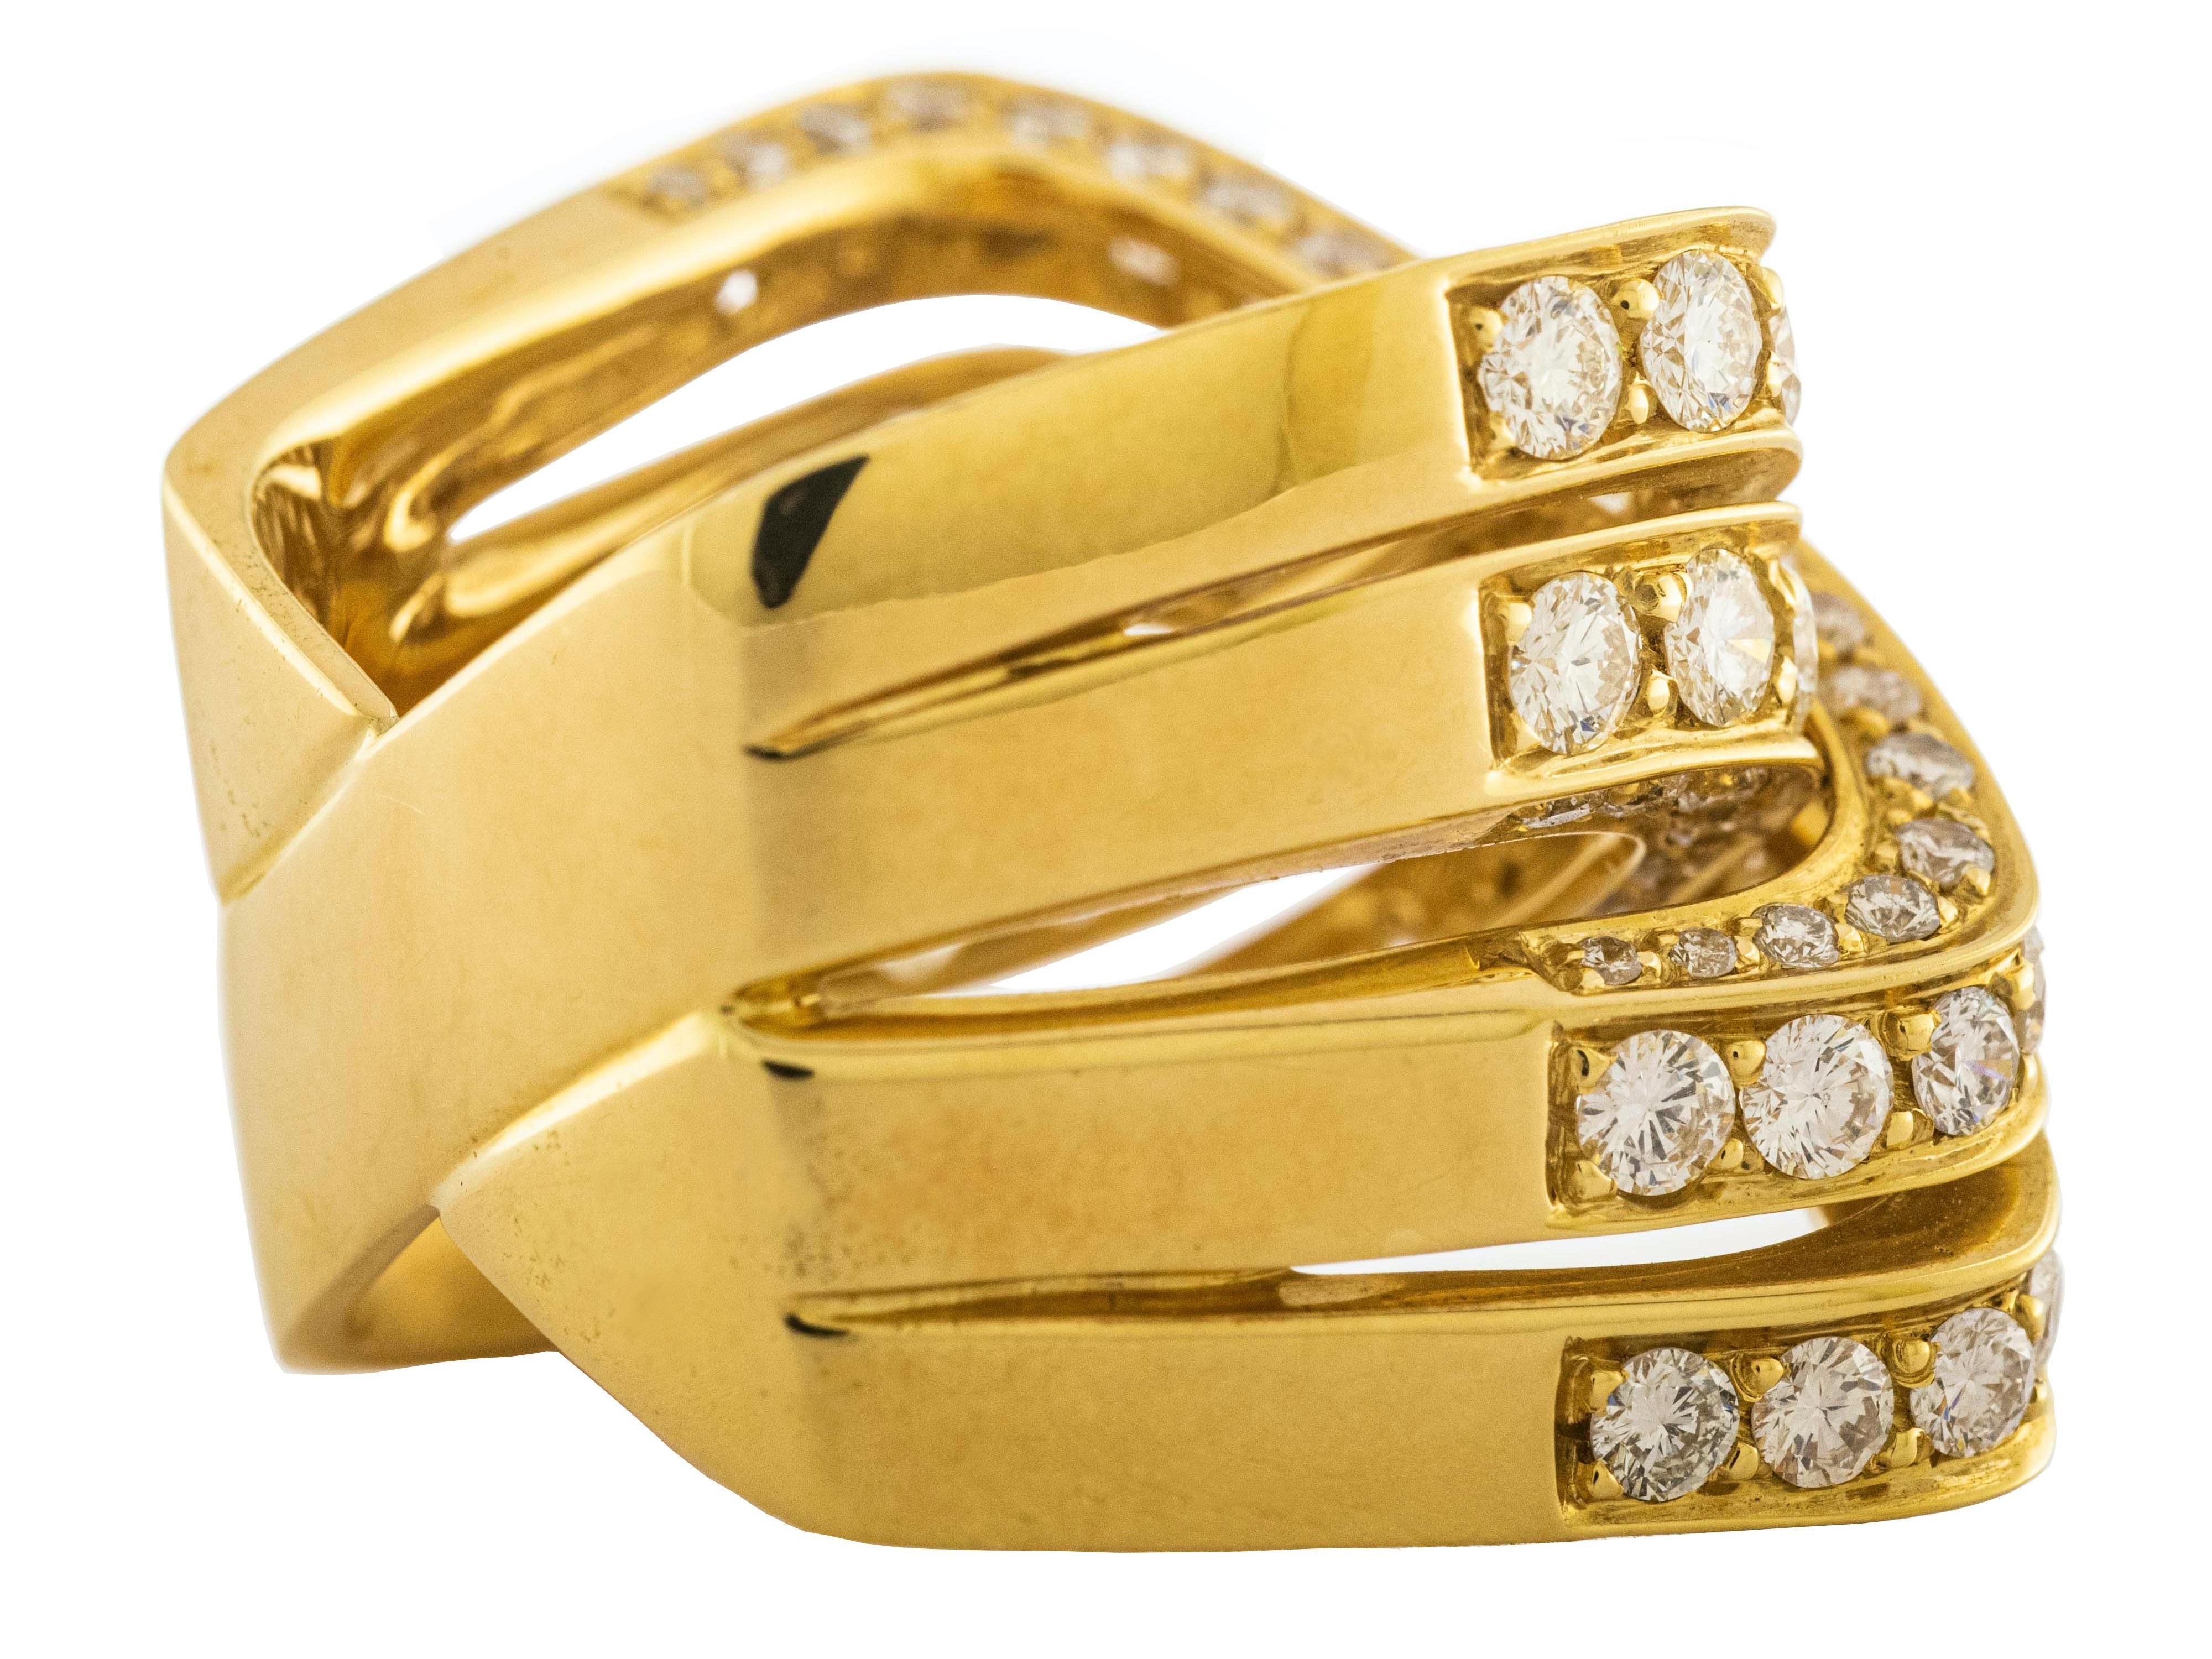 Contemporary 18 Karat Yellow Gold Diamonds Ct 3.89 Knot Ring Cluster Band Cocktail For Sale